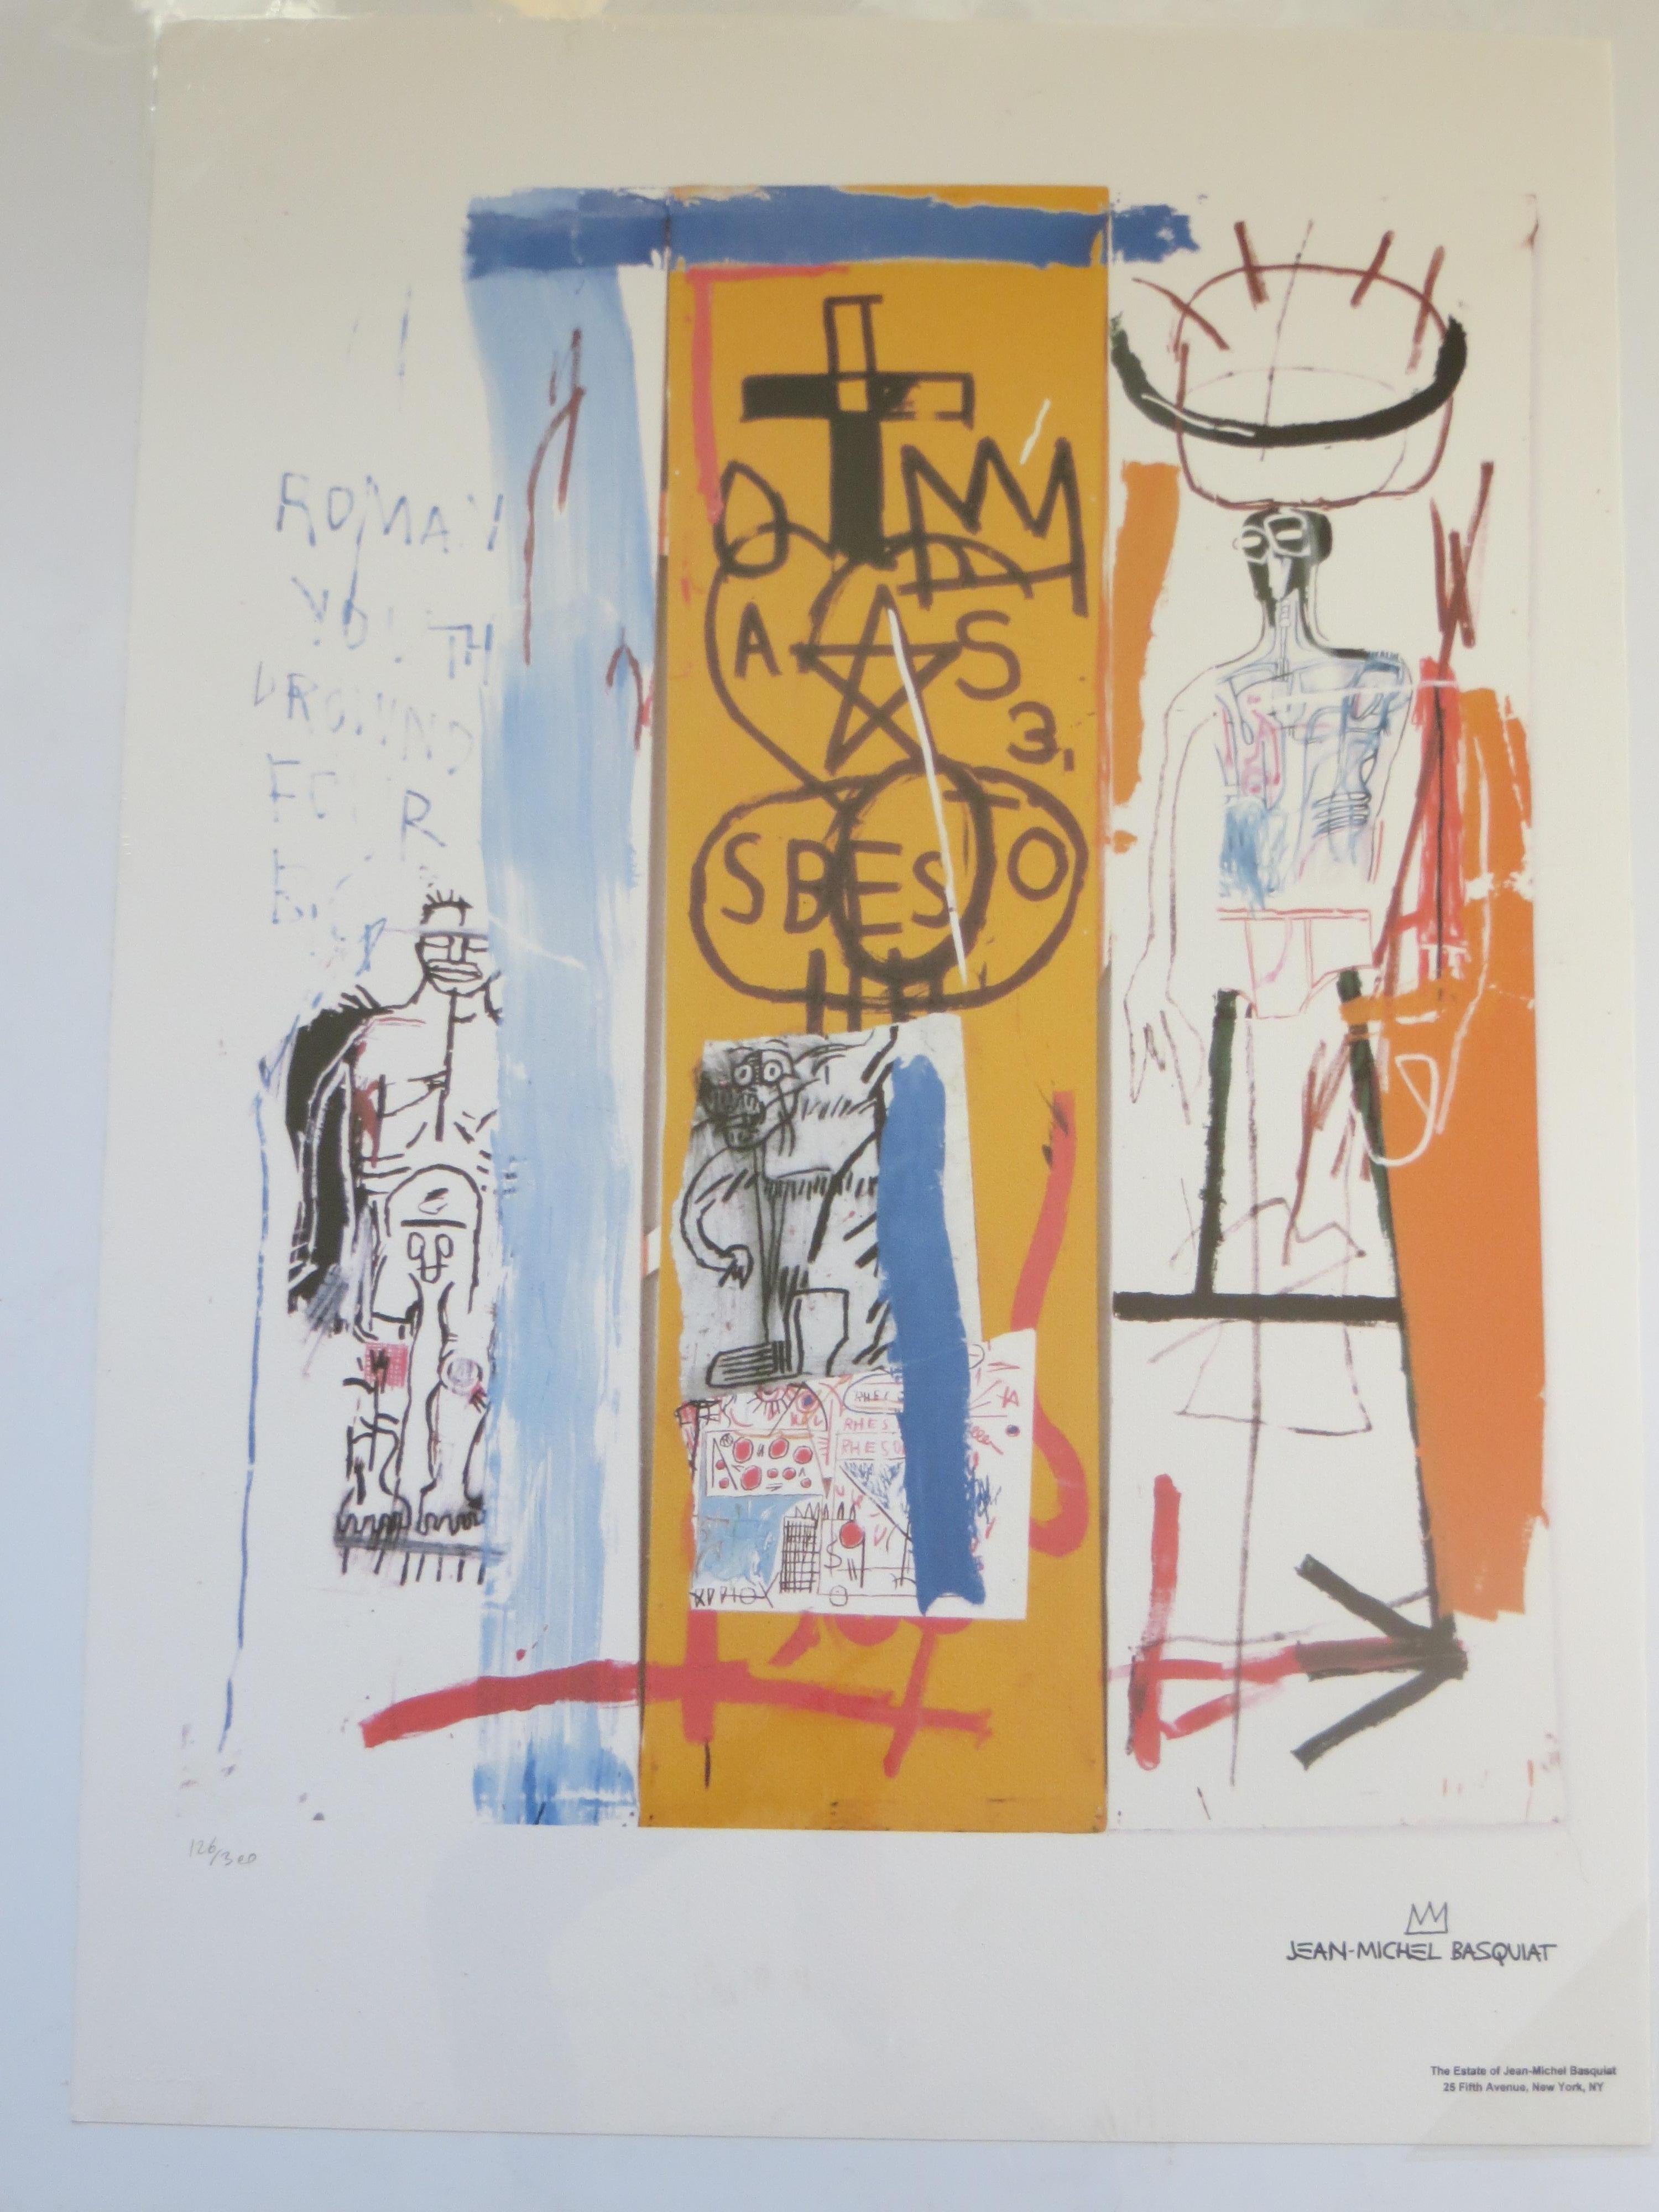 The Estate of Jean-Michel Basquiat,  Lithograph 126/300 - Street Art Print by (after) Jean-Michel Basquiat